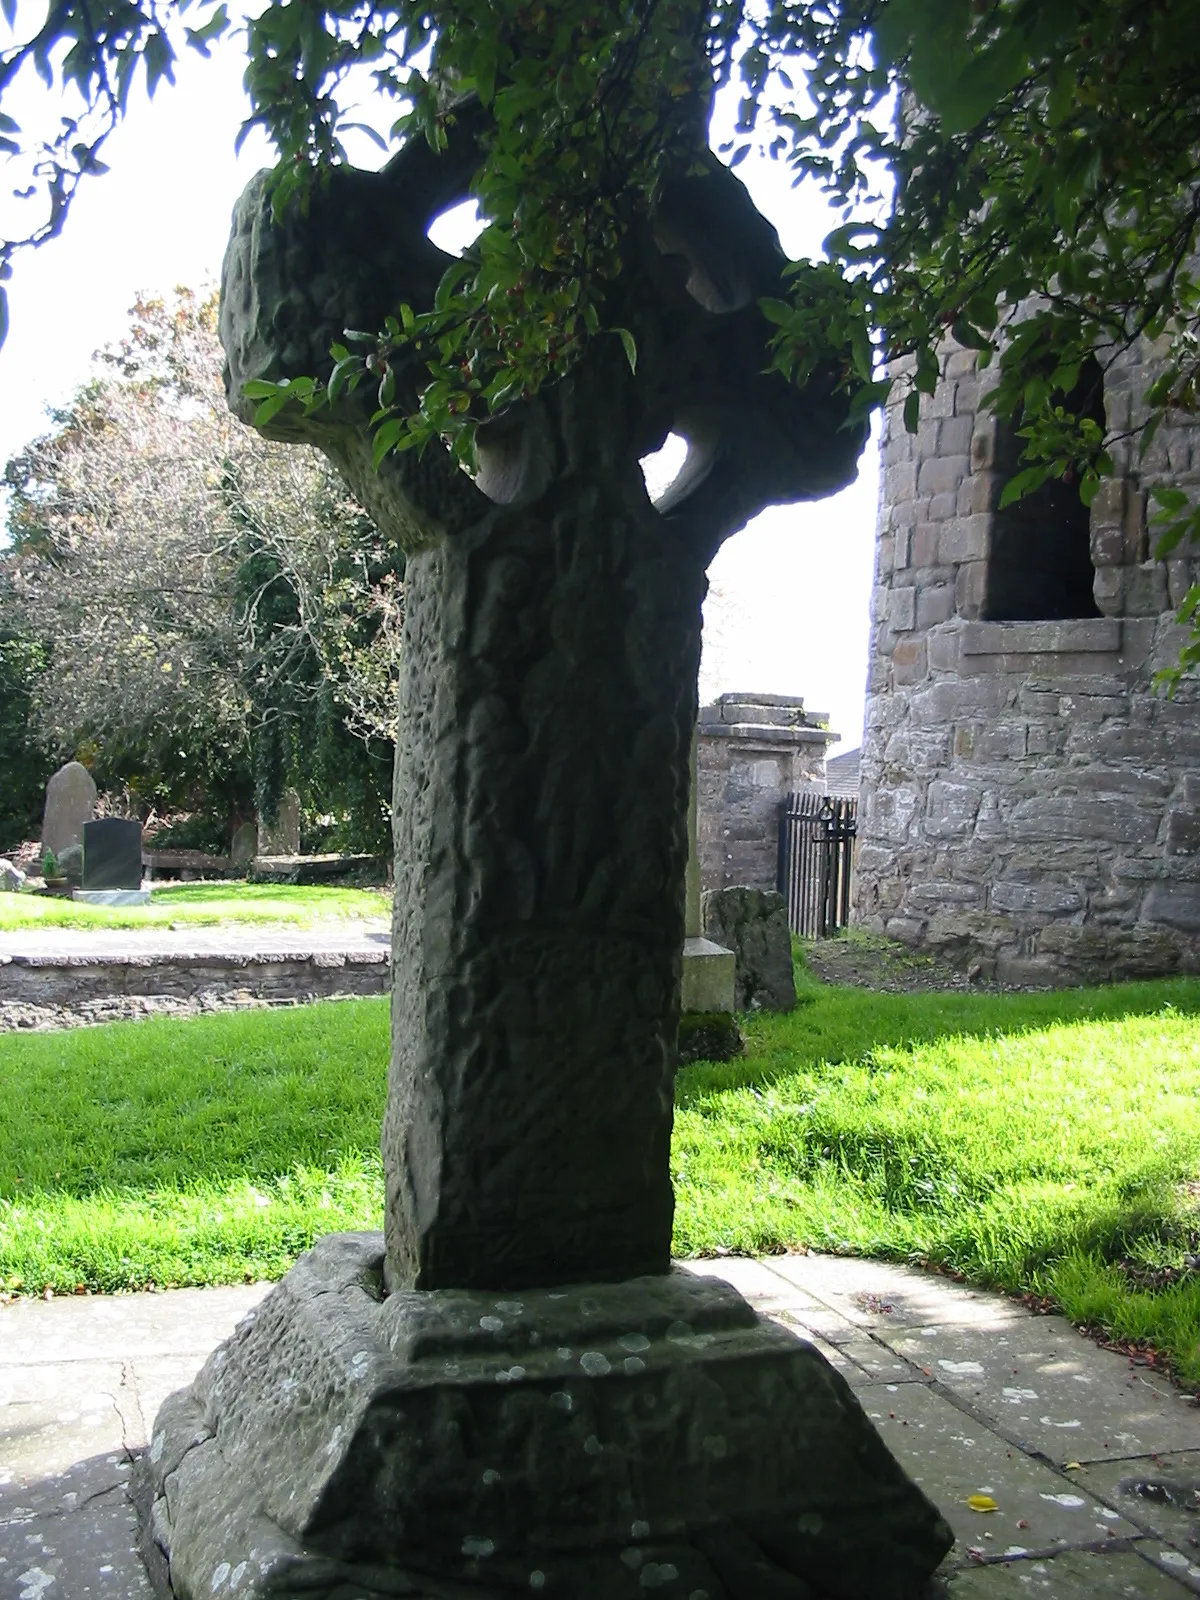 Photo showing: The Cross of Kells, or Cross of Patrick and Columba (as it is writen on it, it is strangely dedicated to this two saints), is the oldest of the five high crosses in Kells, County Meath, Ireland. This is the western face.